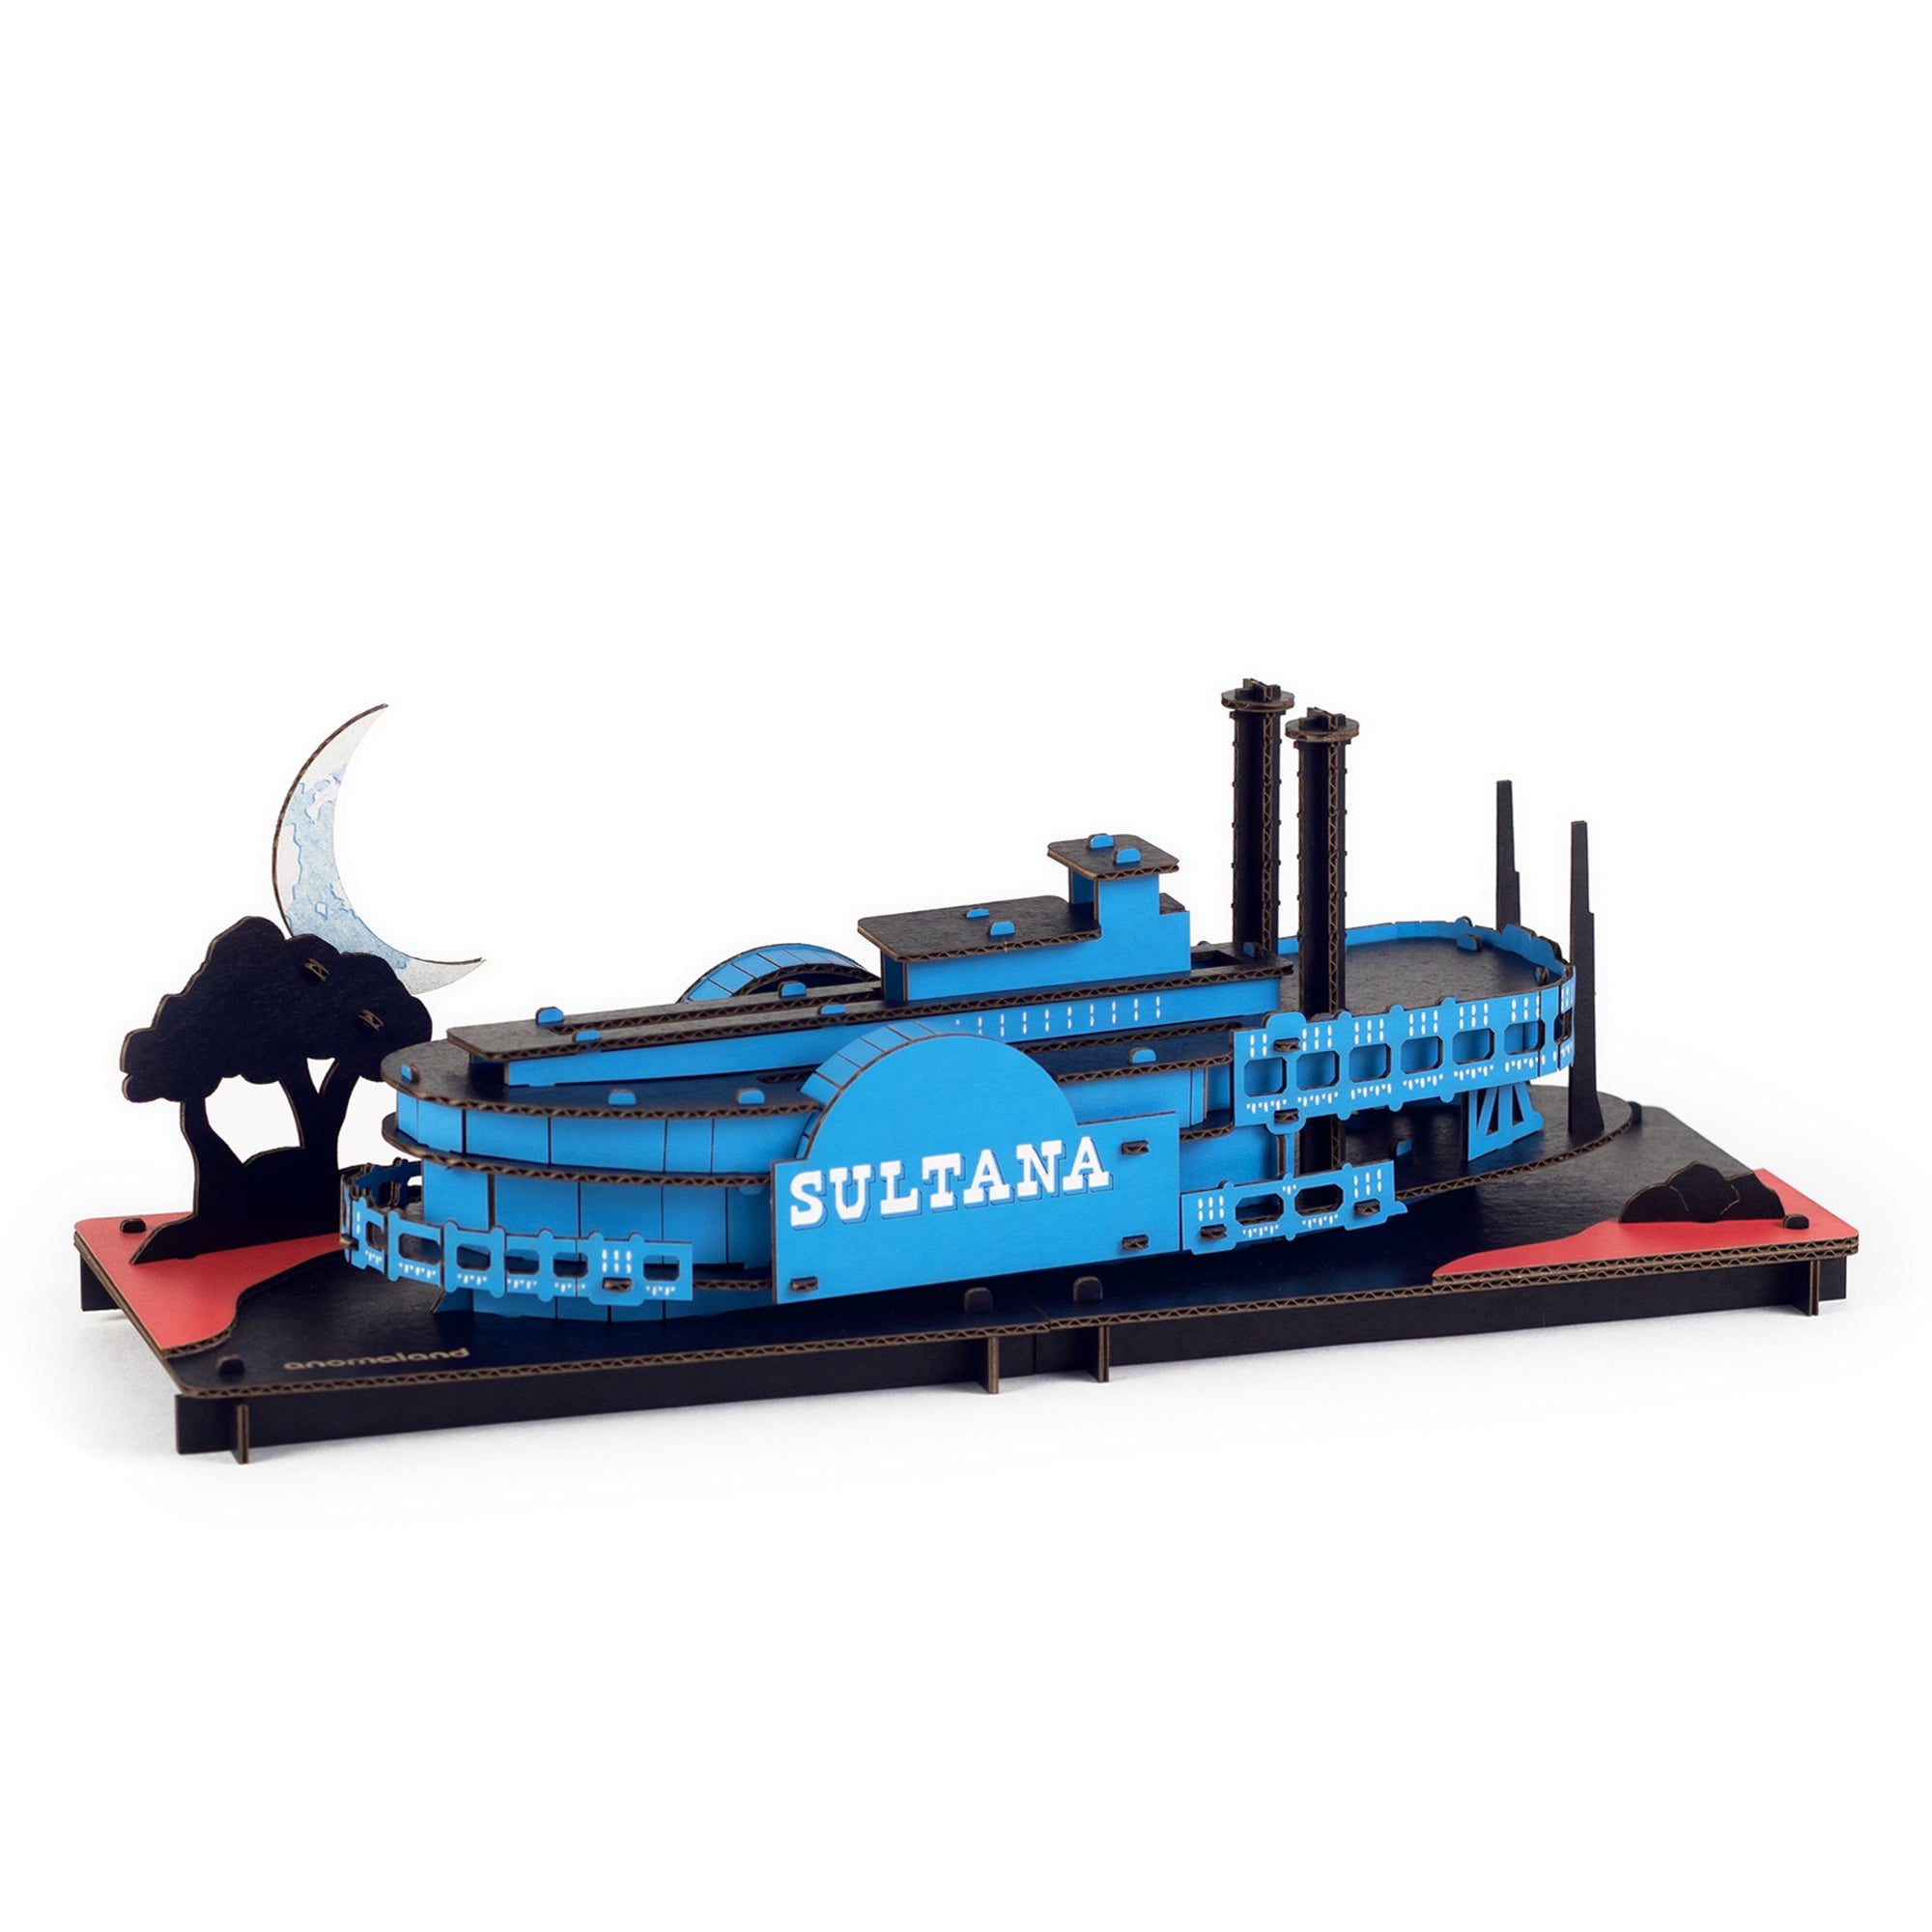 Sultana Steamboat Disaster Model Kit shown assembled with flames hidden